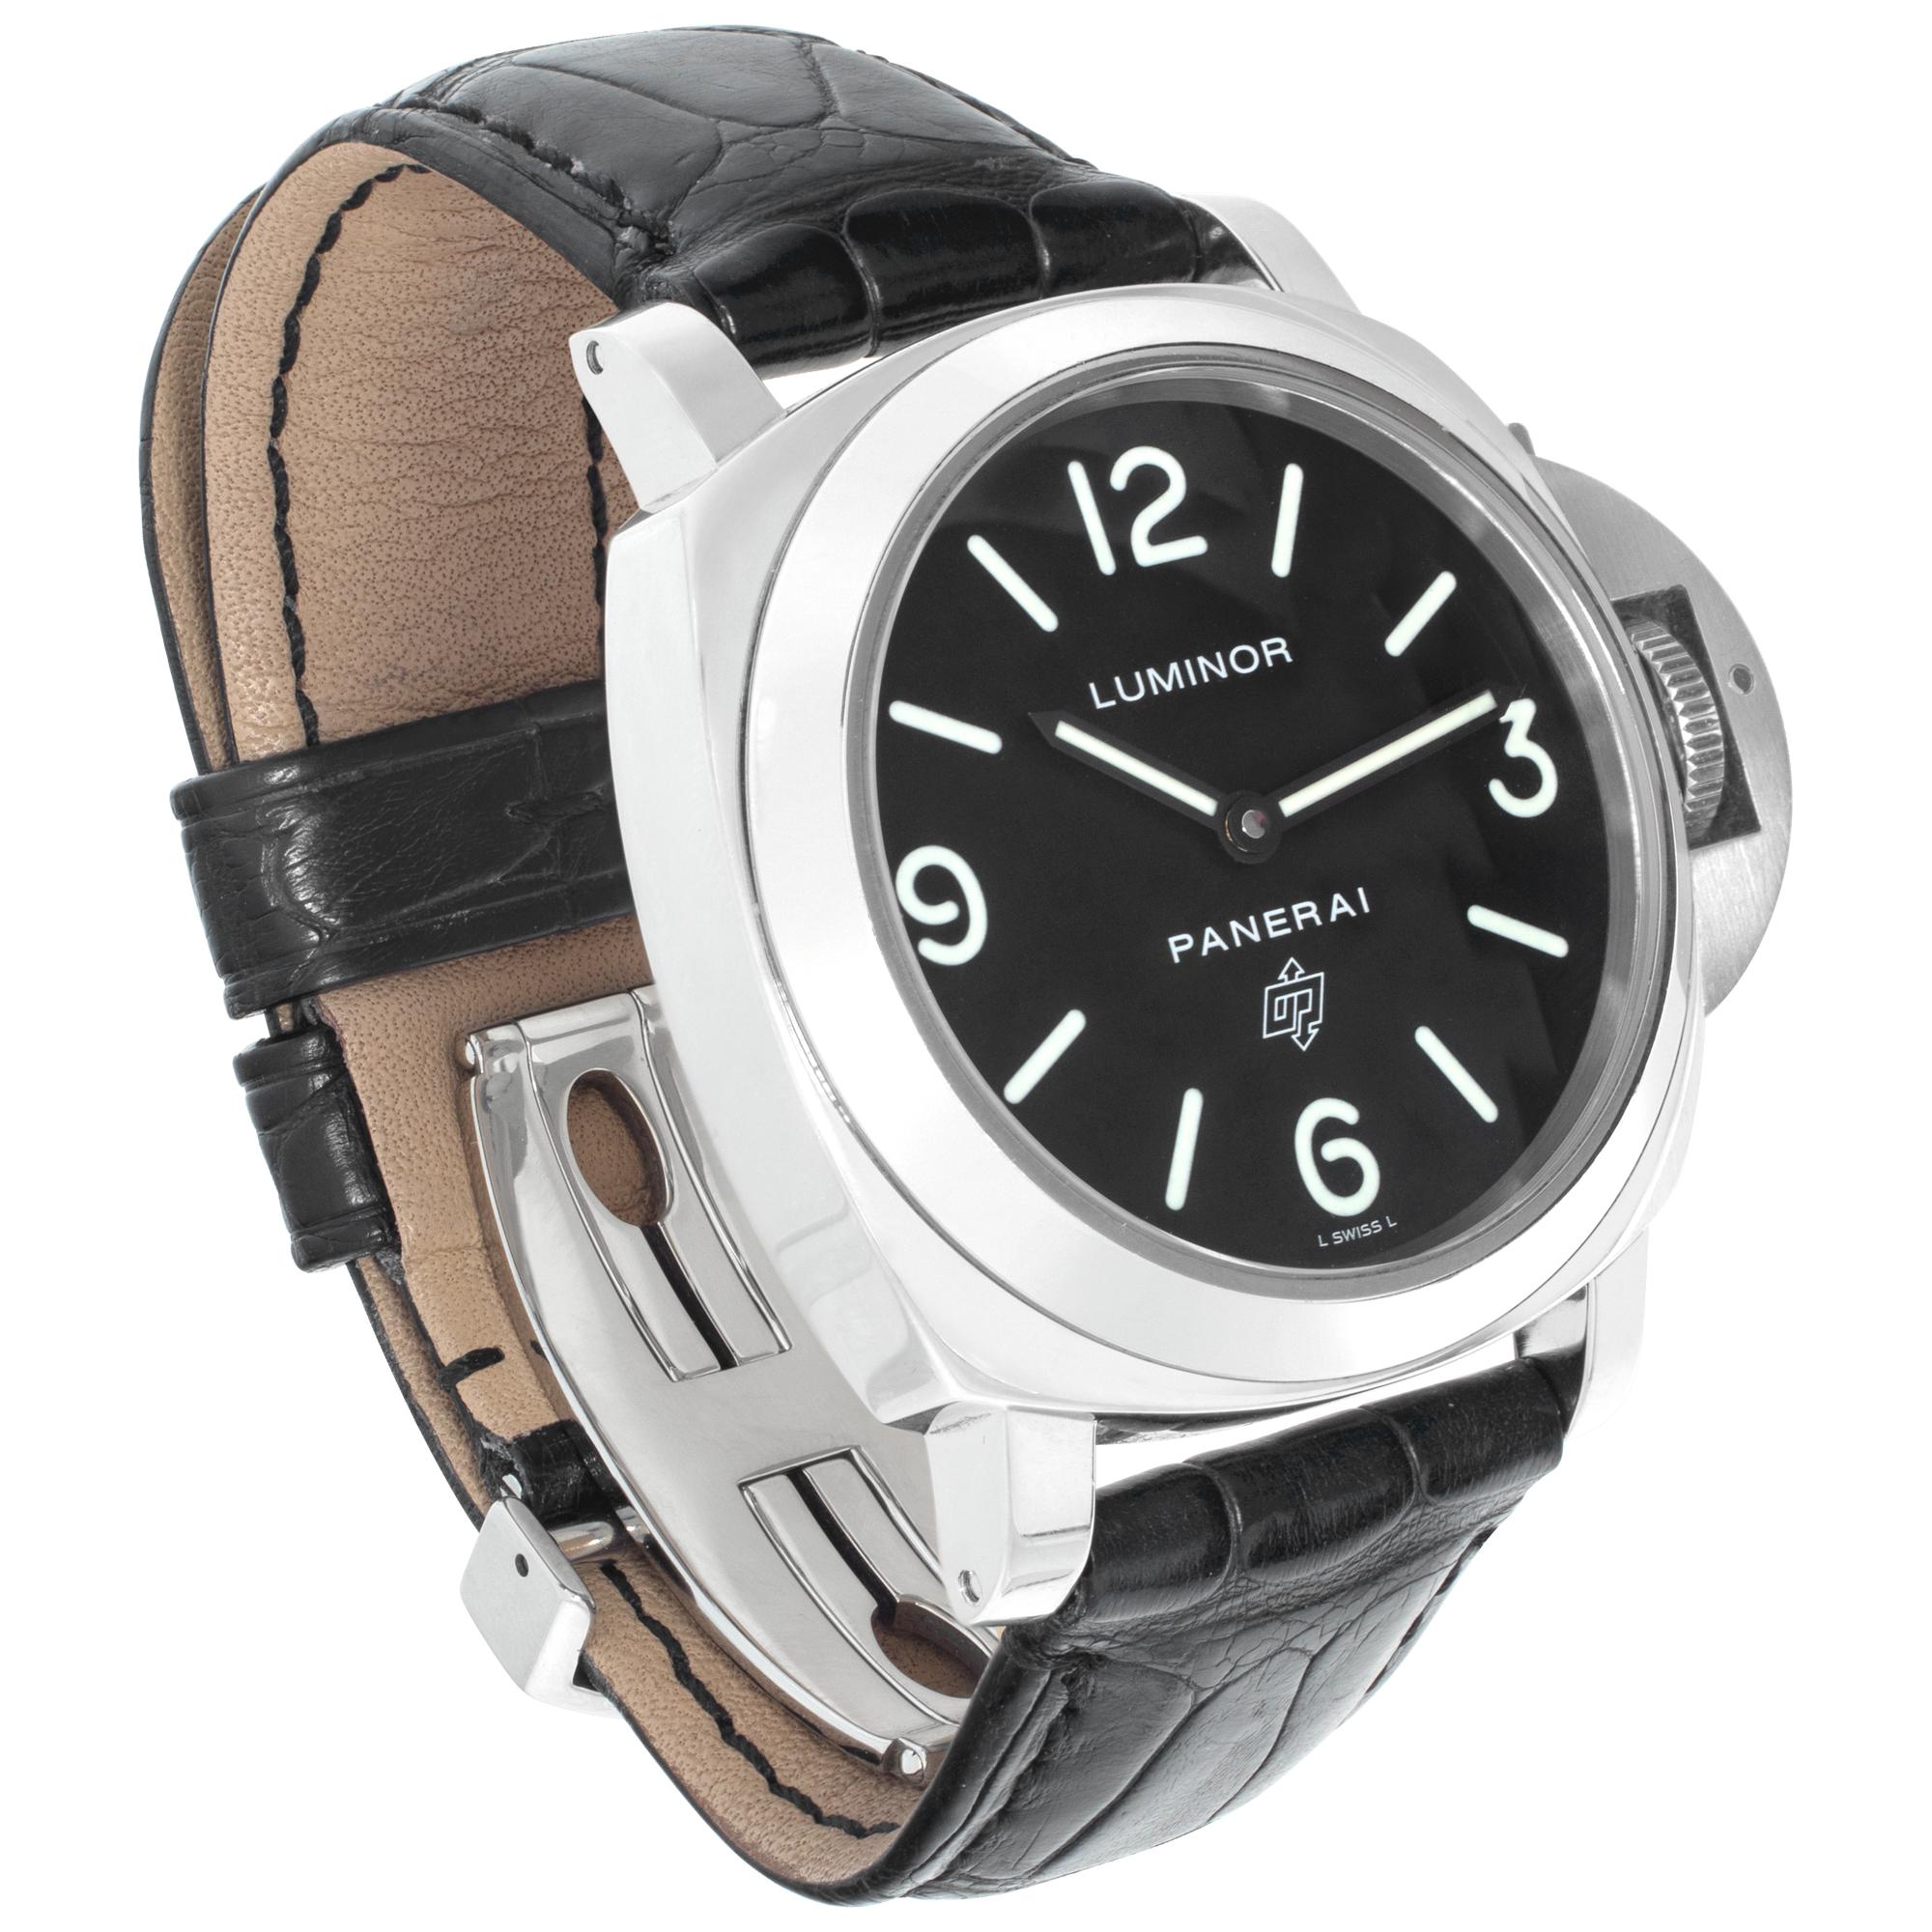 Panerai Luminor stainless steel Manual Wristwatch PAM000 In Excellent Condition For Sale In Surfside, FL